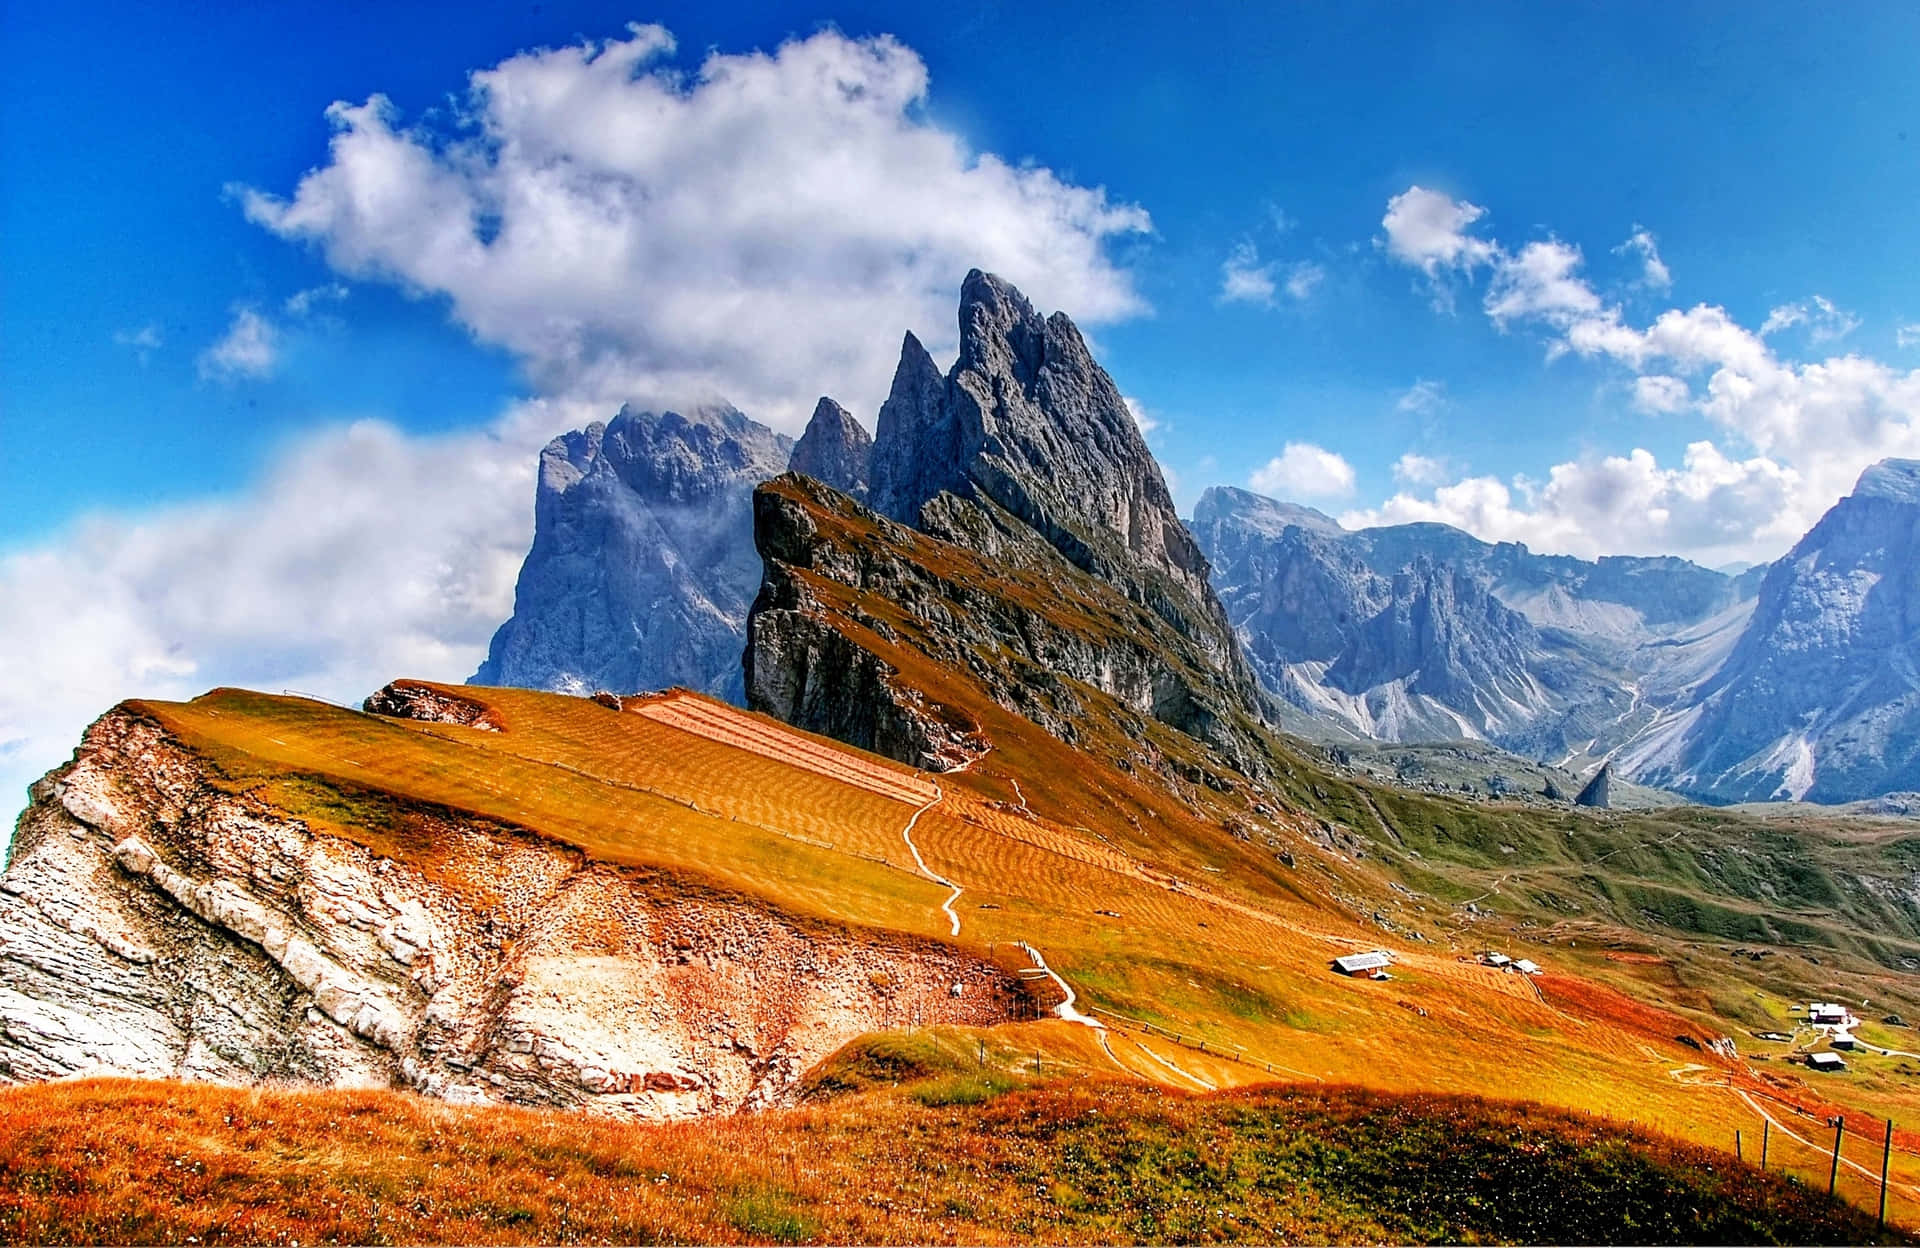 Enjoy majestic mountain views with this stunning landscape Wallpaper